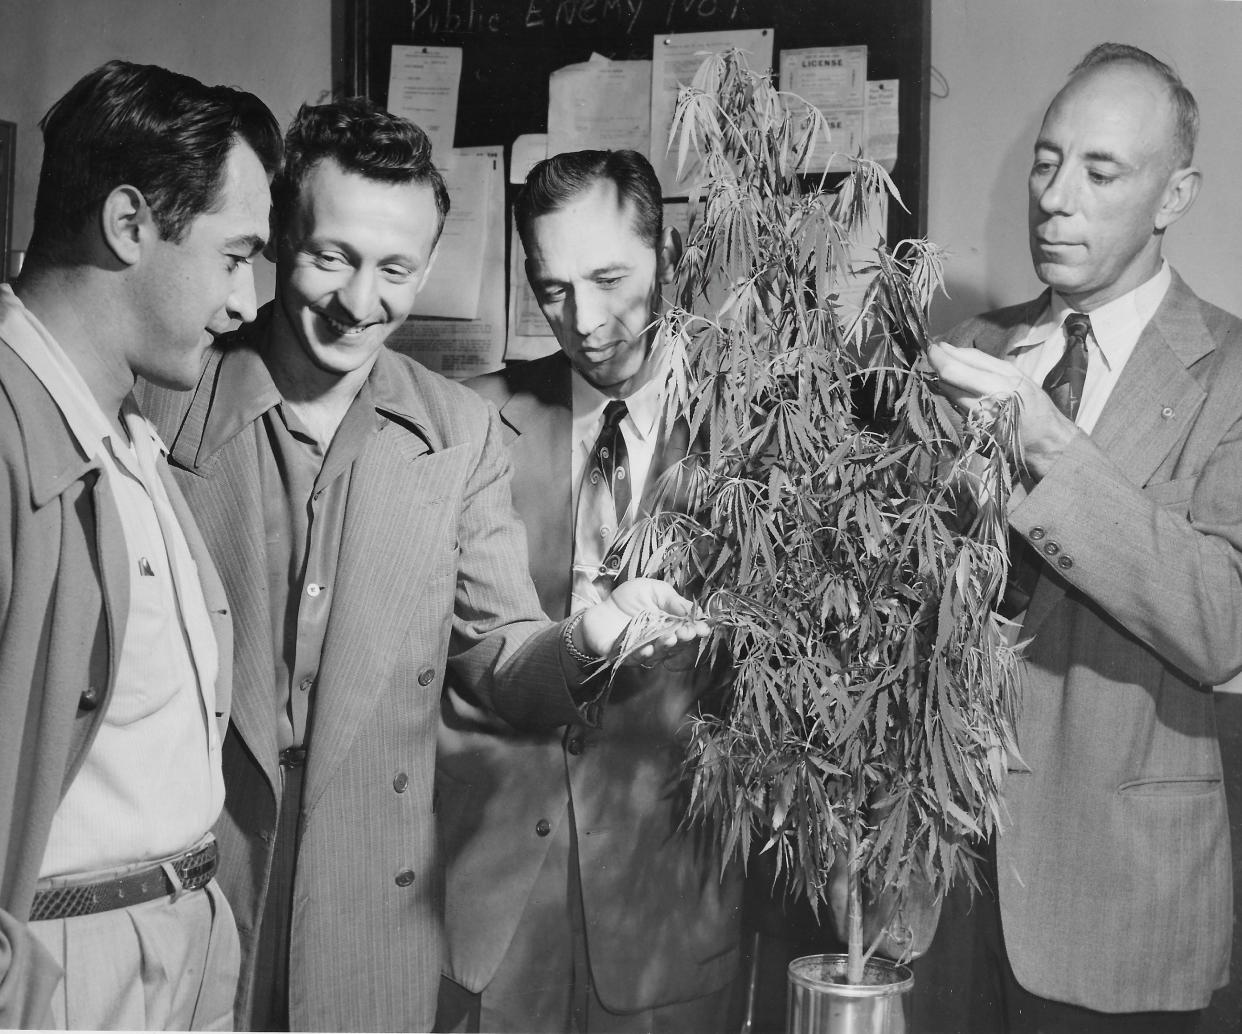 Akron police take a closer look at marijuana plants grown at the downtown station in 1951. Pictured are Patrolman Paul Yecs, Patrolman Florian Smole, Lt. Cletus McGuckin and Sgt. George Mullen. Smole grew the plants to help officers better identify them.